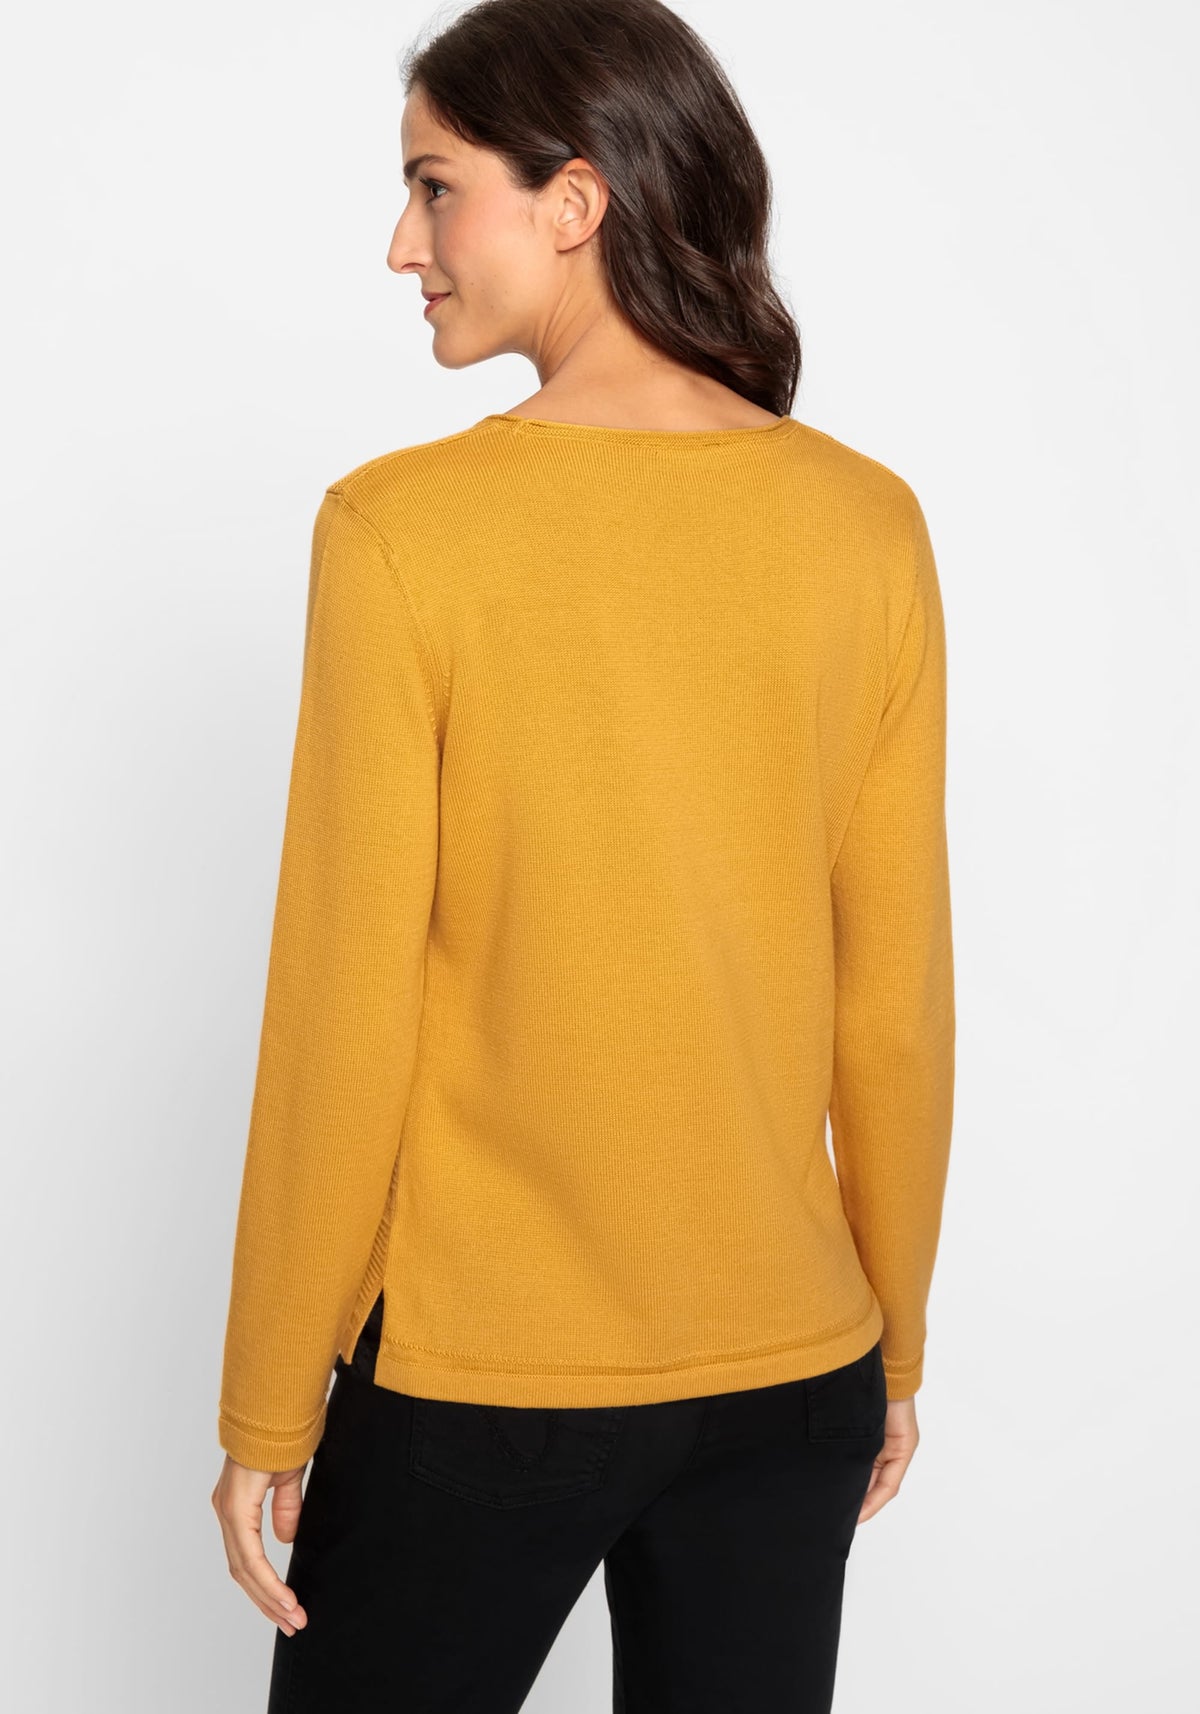 Cotton Blend Long Sleeve Rib Knit Pullover